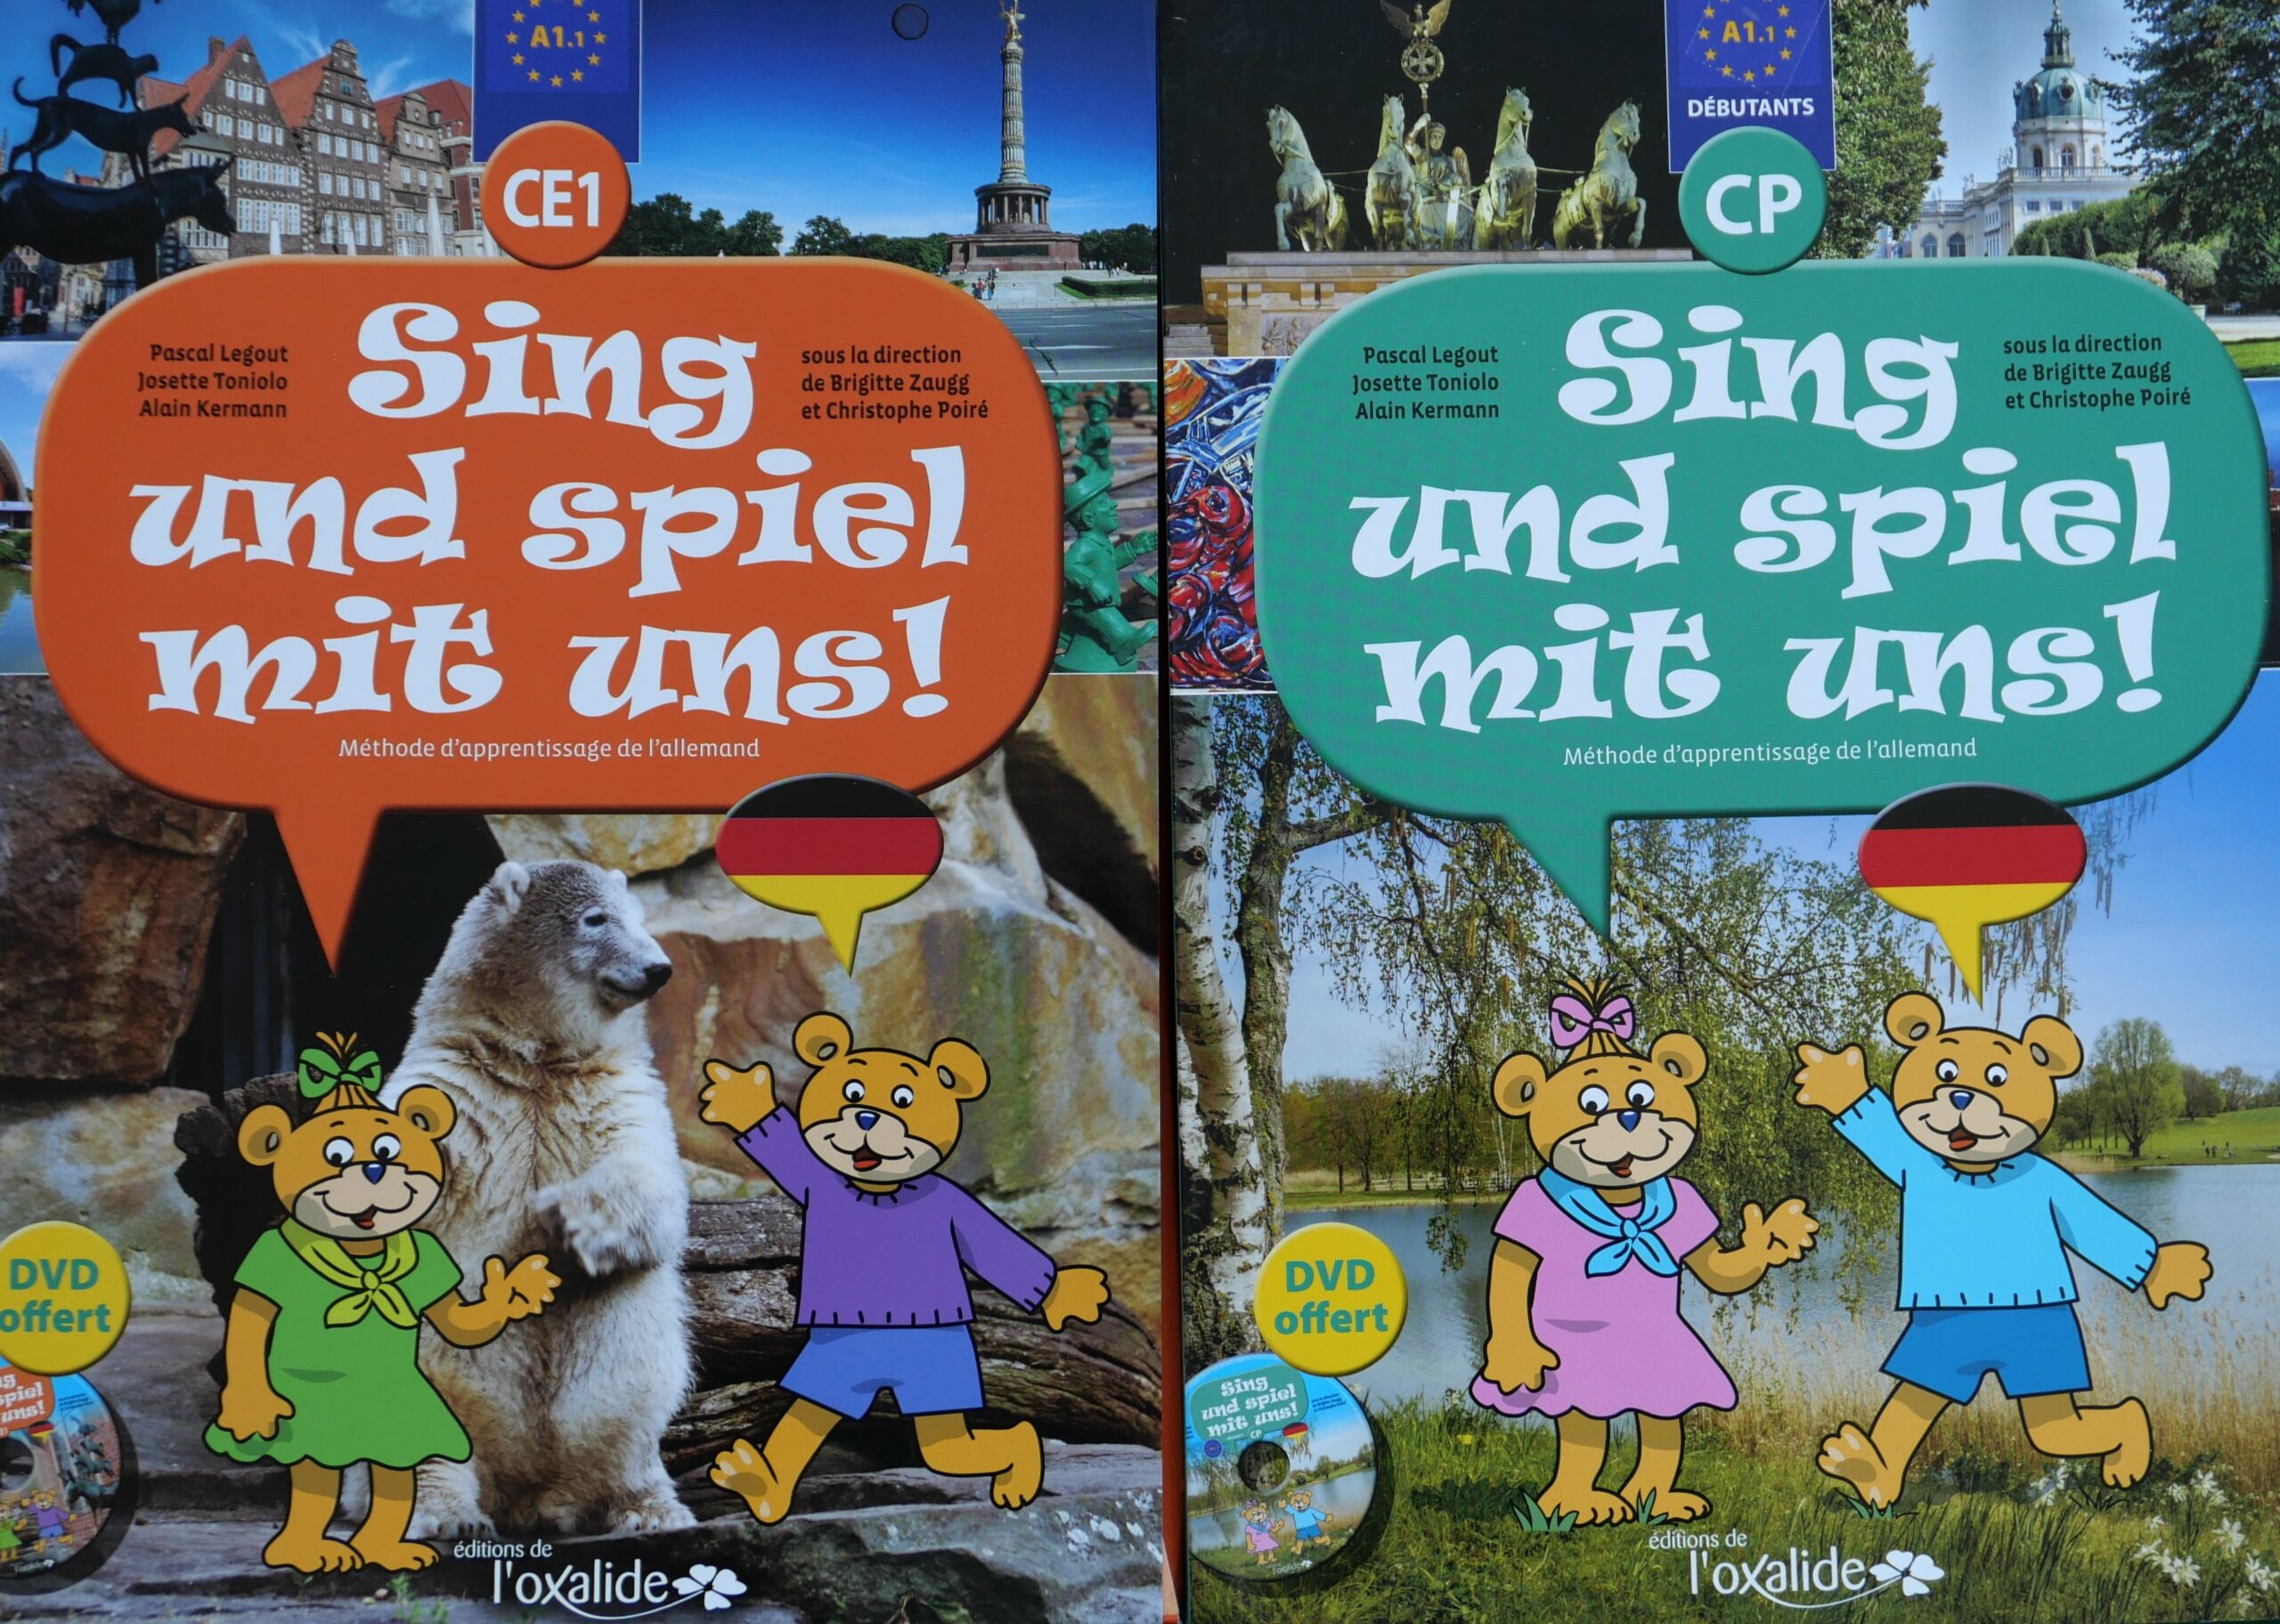 You are currently viewing Sing und spiel mit uns – débutants